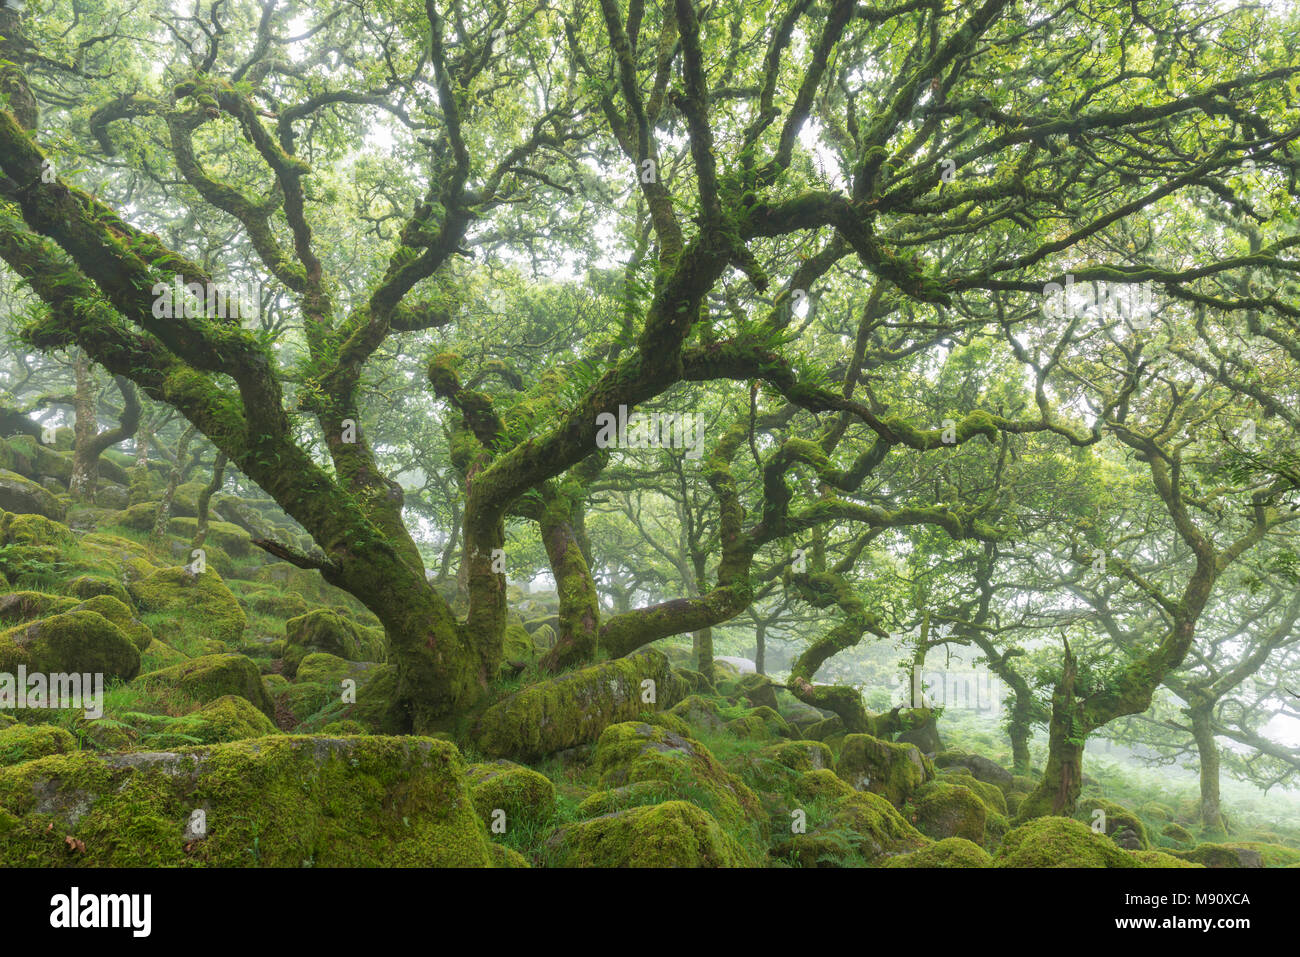 Gnarled, twisted, moss covered Stunted oak trees in Wistman’s Wood SSSI, Dartmoor National Park, Devon, England. Summer (July) 2017. Stock Photo